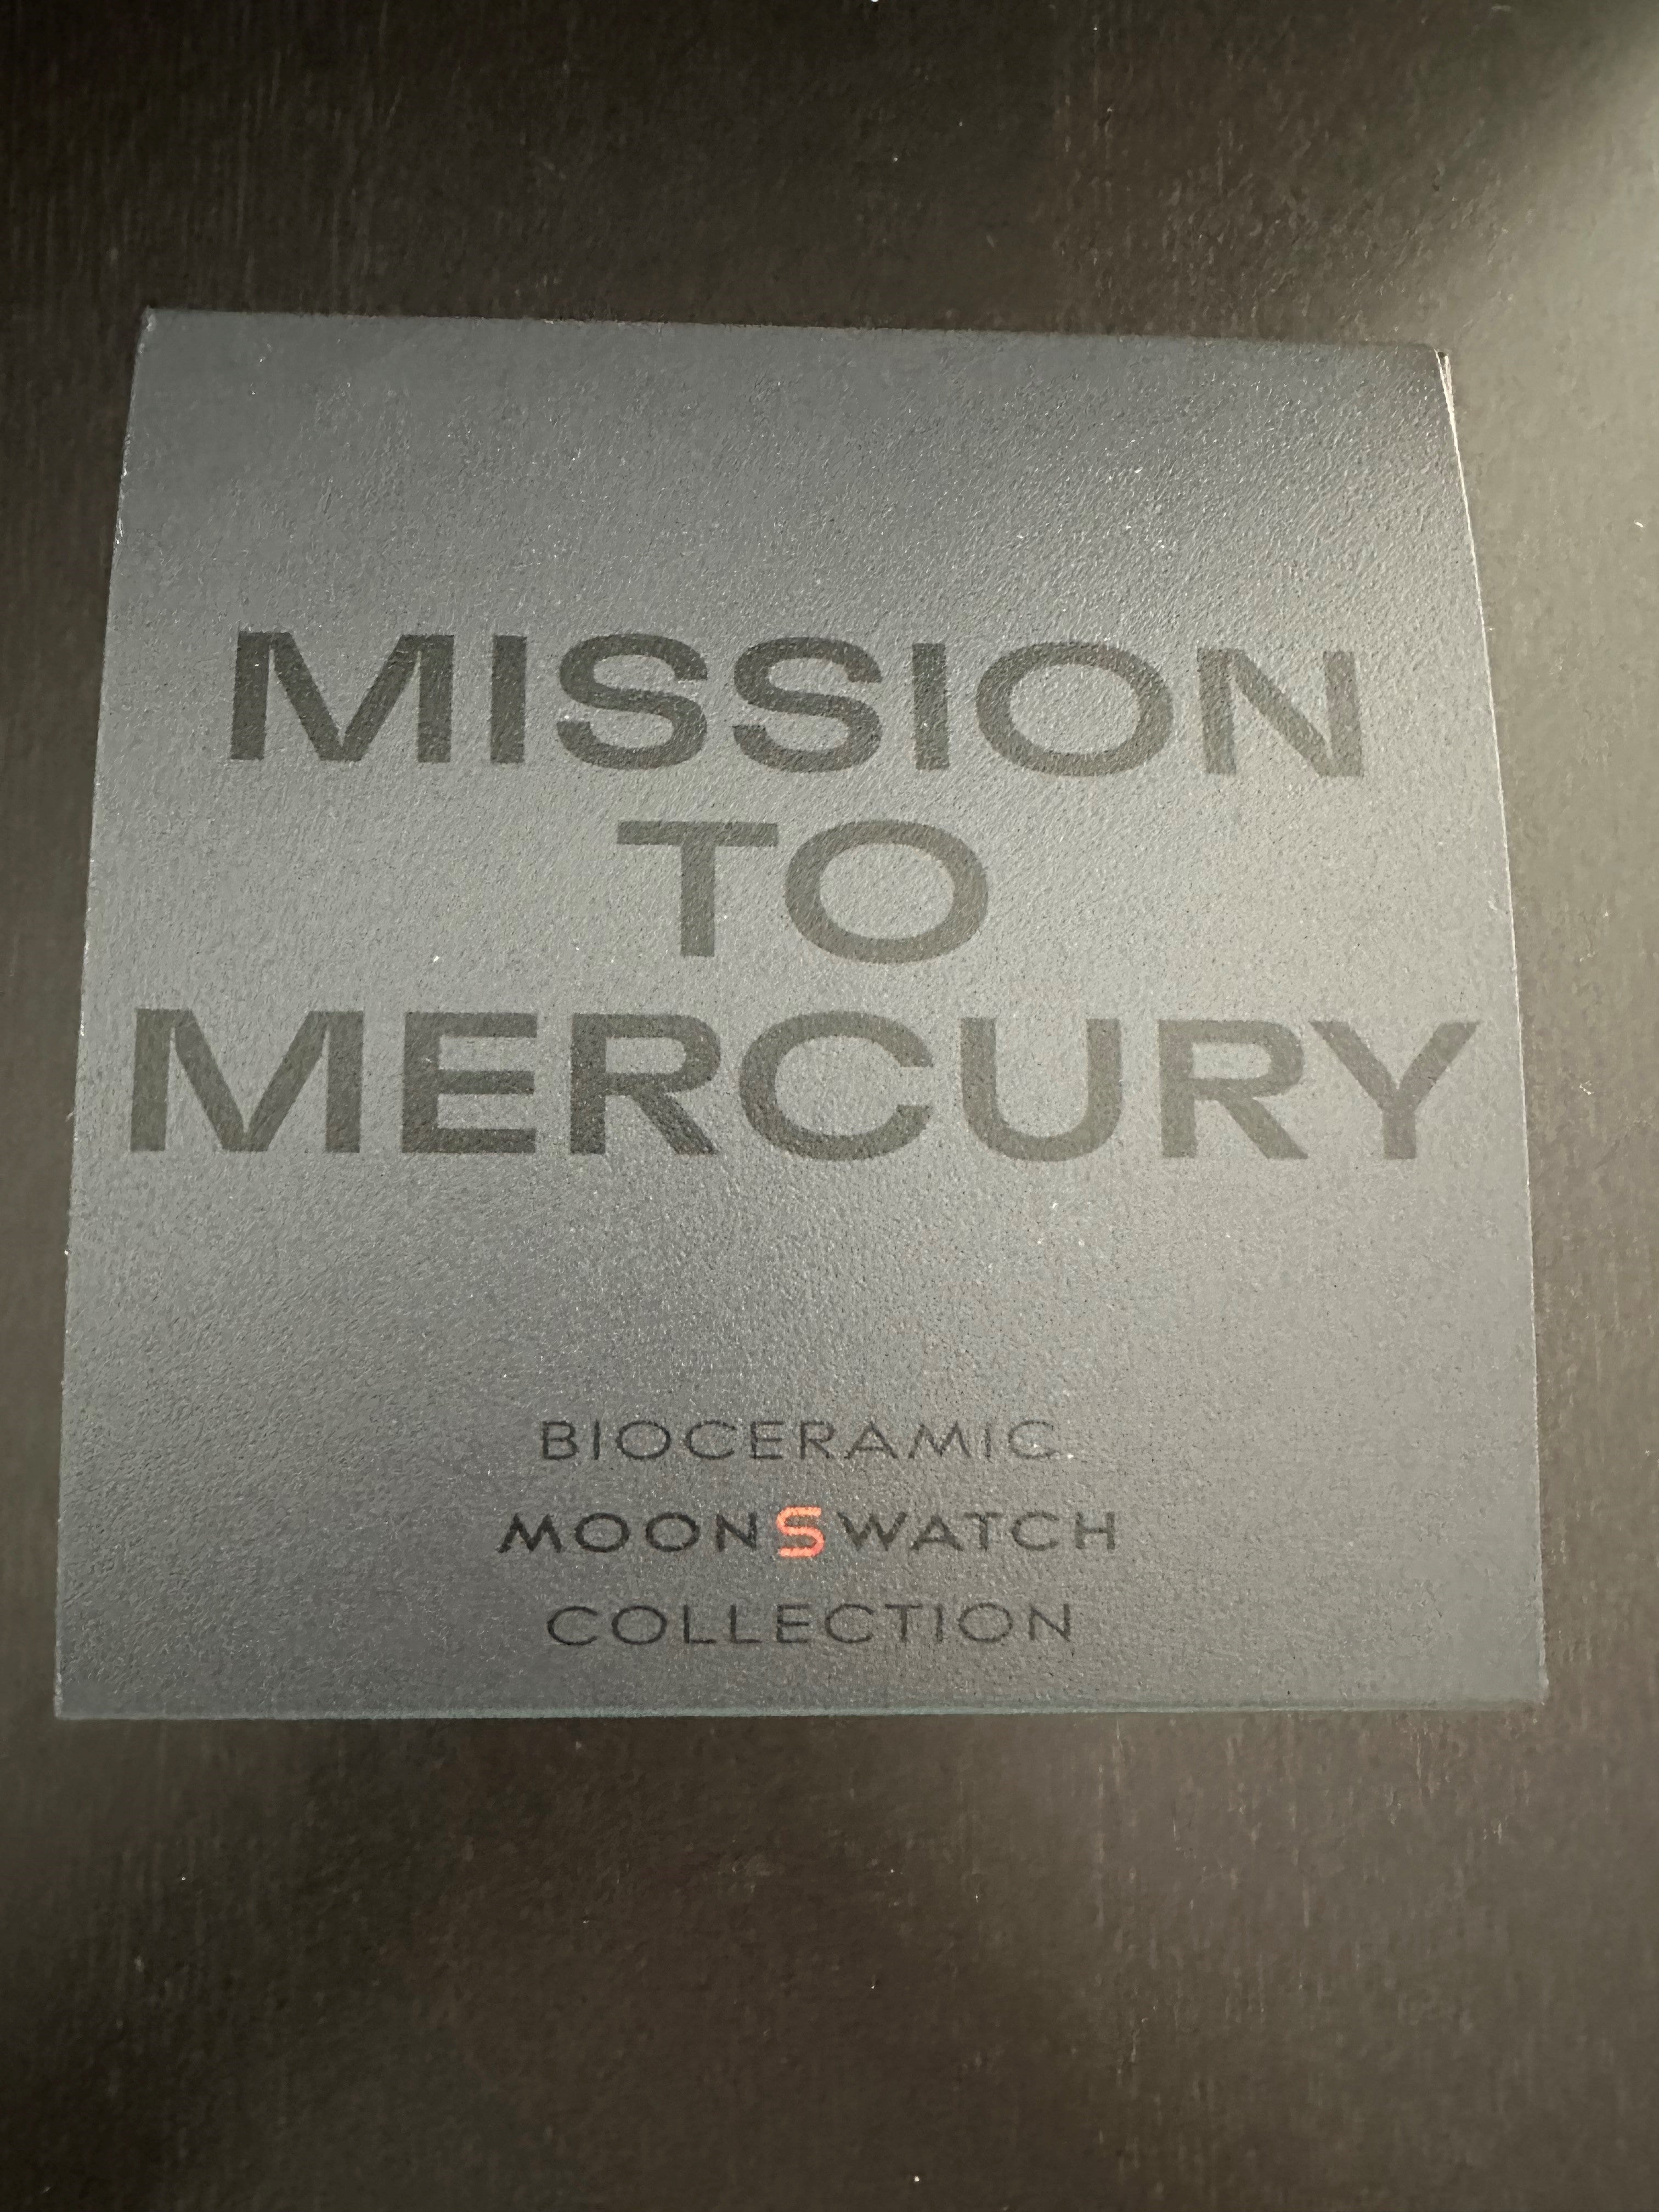 Swatch Moonswatch "Mission To Mercury" Swatch x Omega Negro 42mm SO33A100